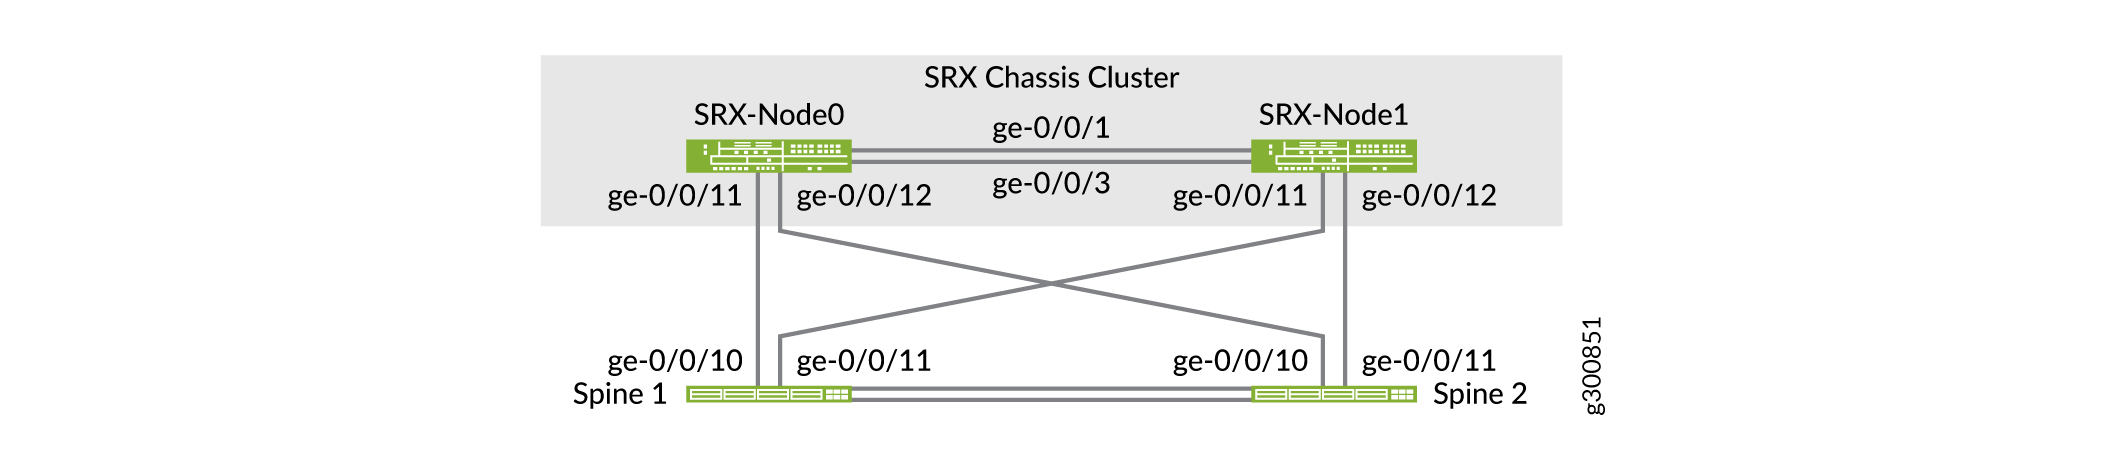 Physical Topology of SRX Cluster